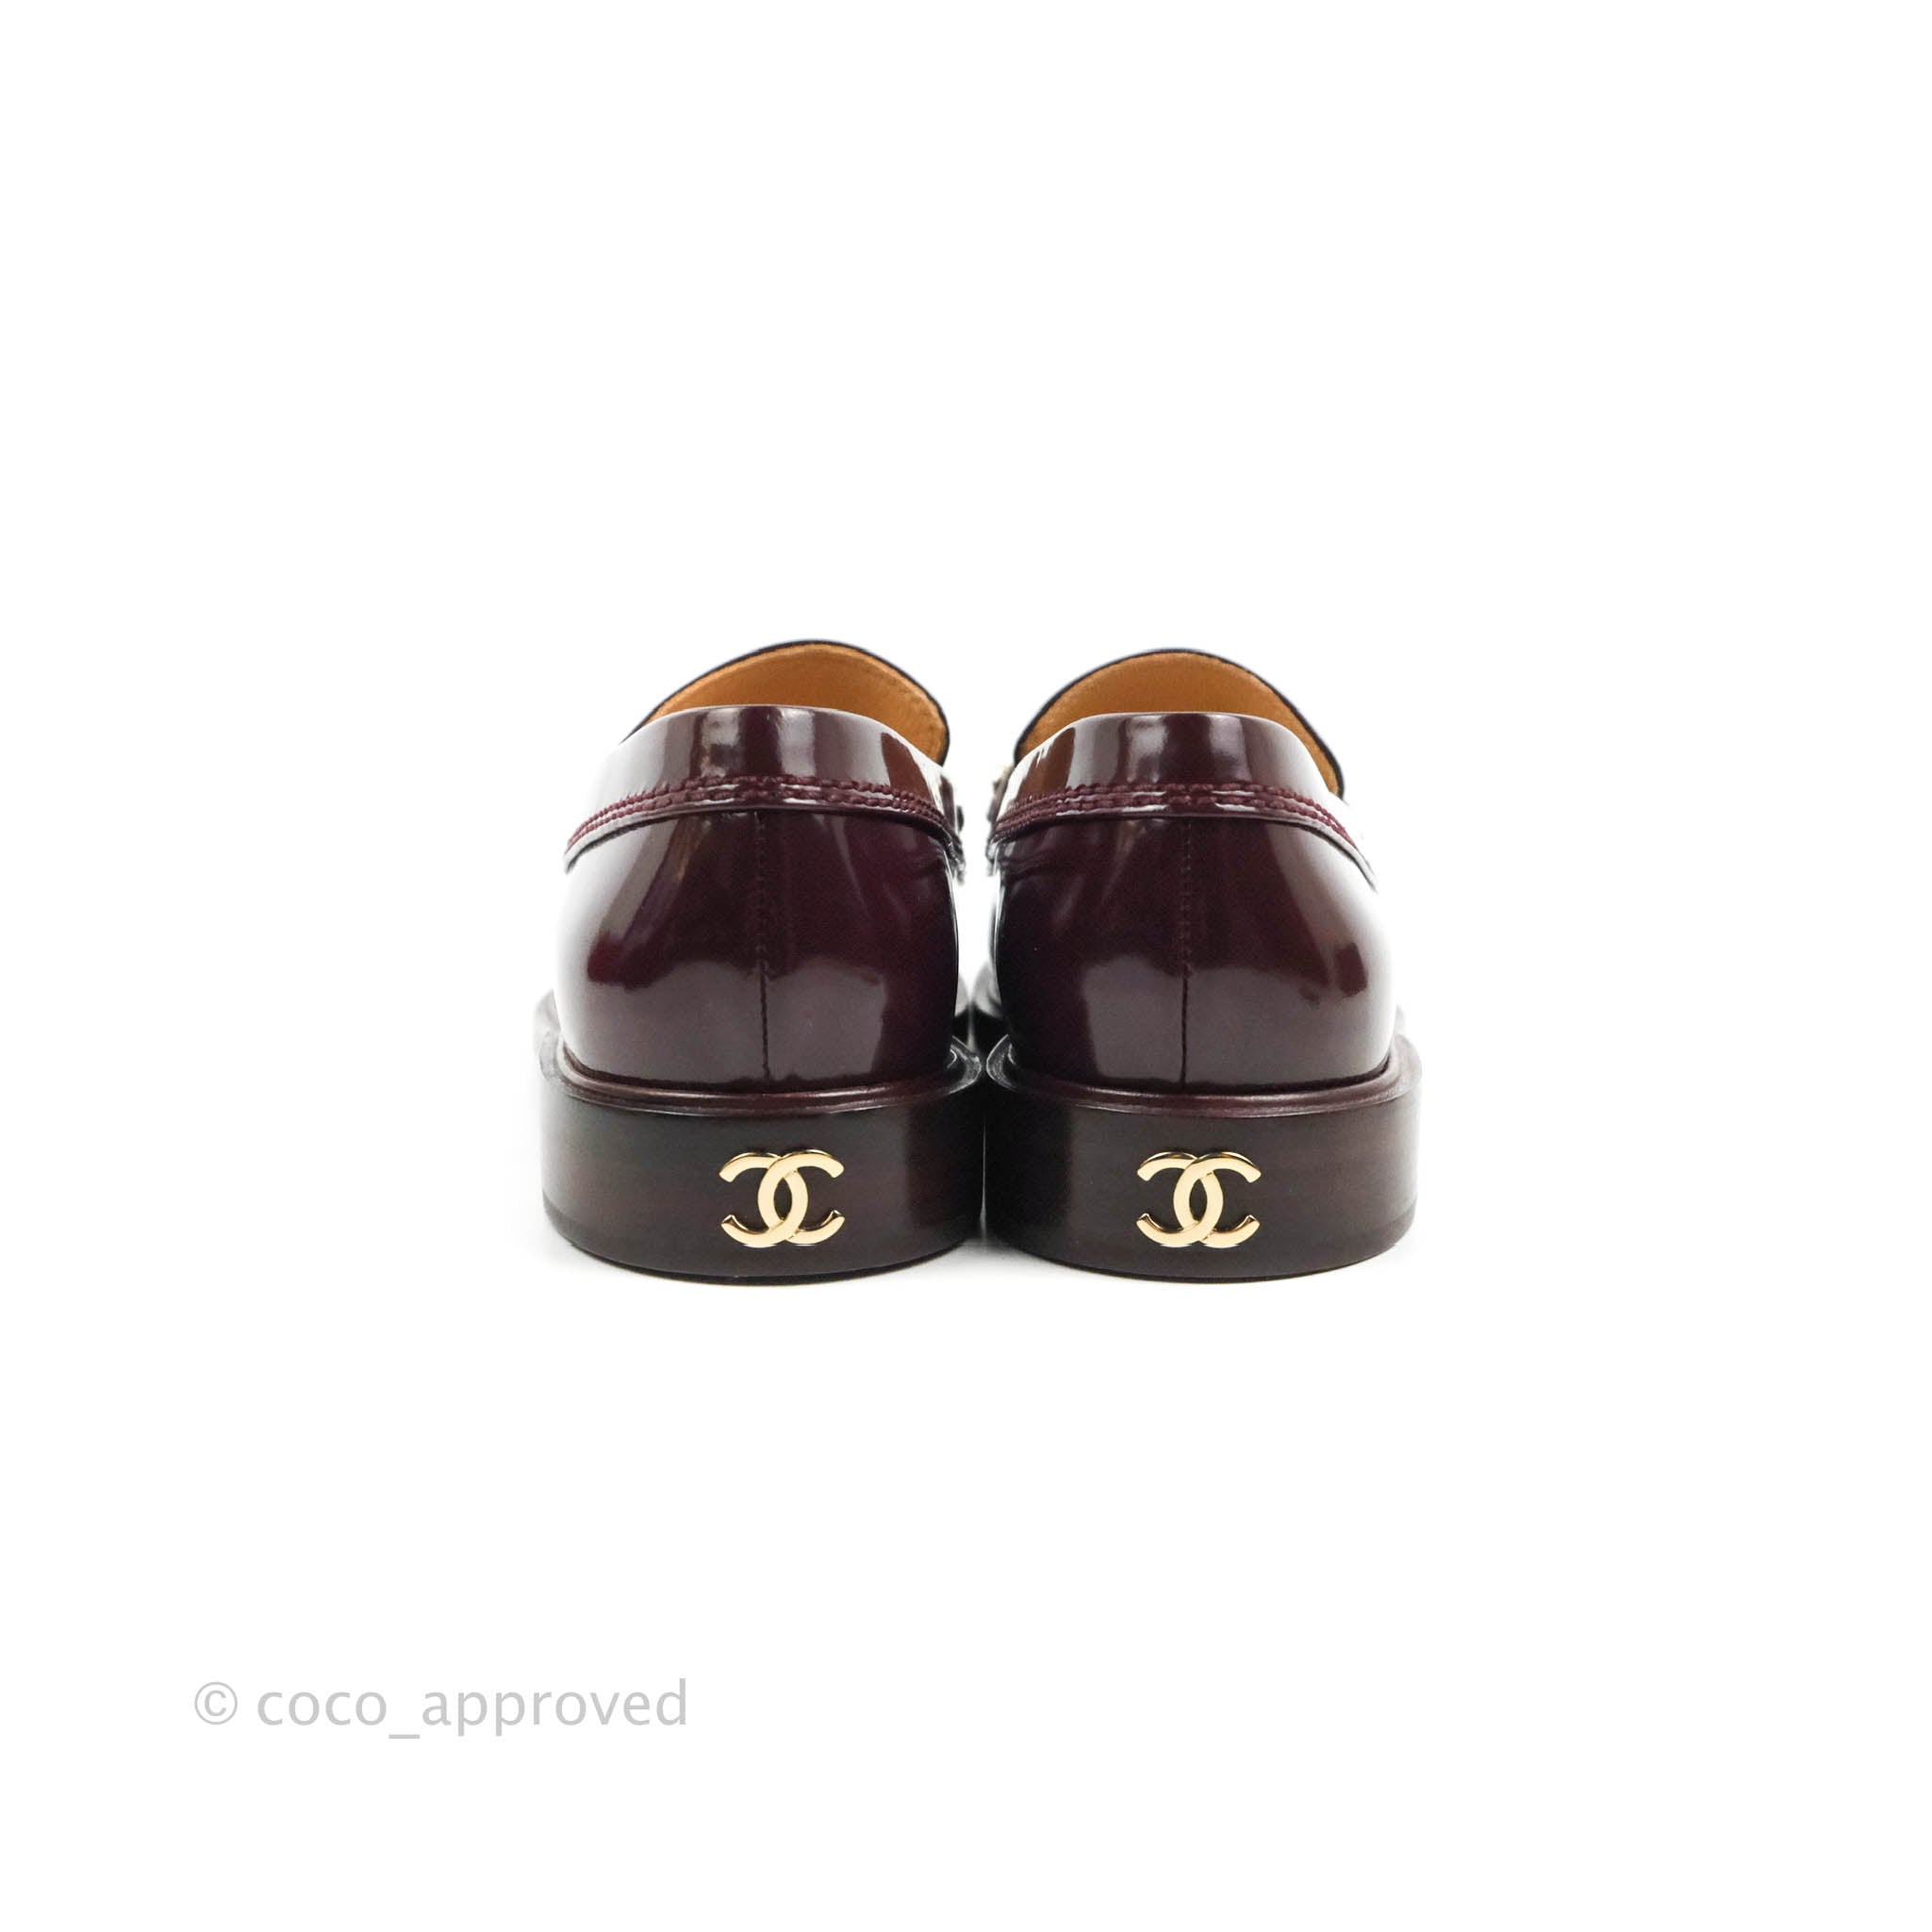 CHANEL, Shoes, 0 Verified Authentic Chanel Pumps Loafers Size 39